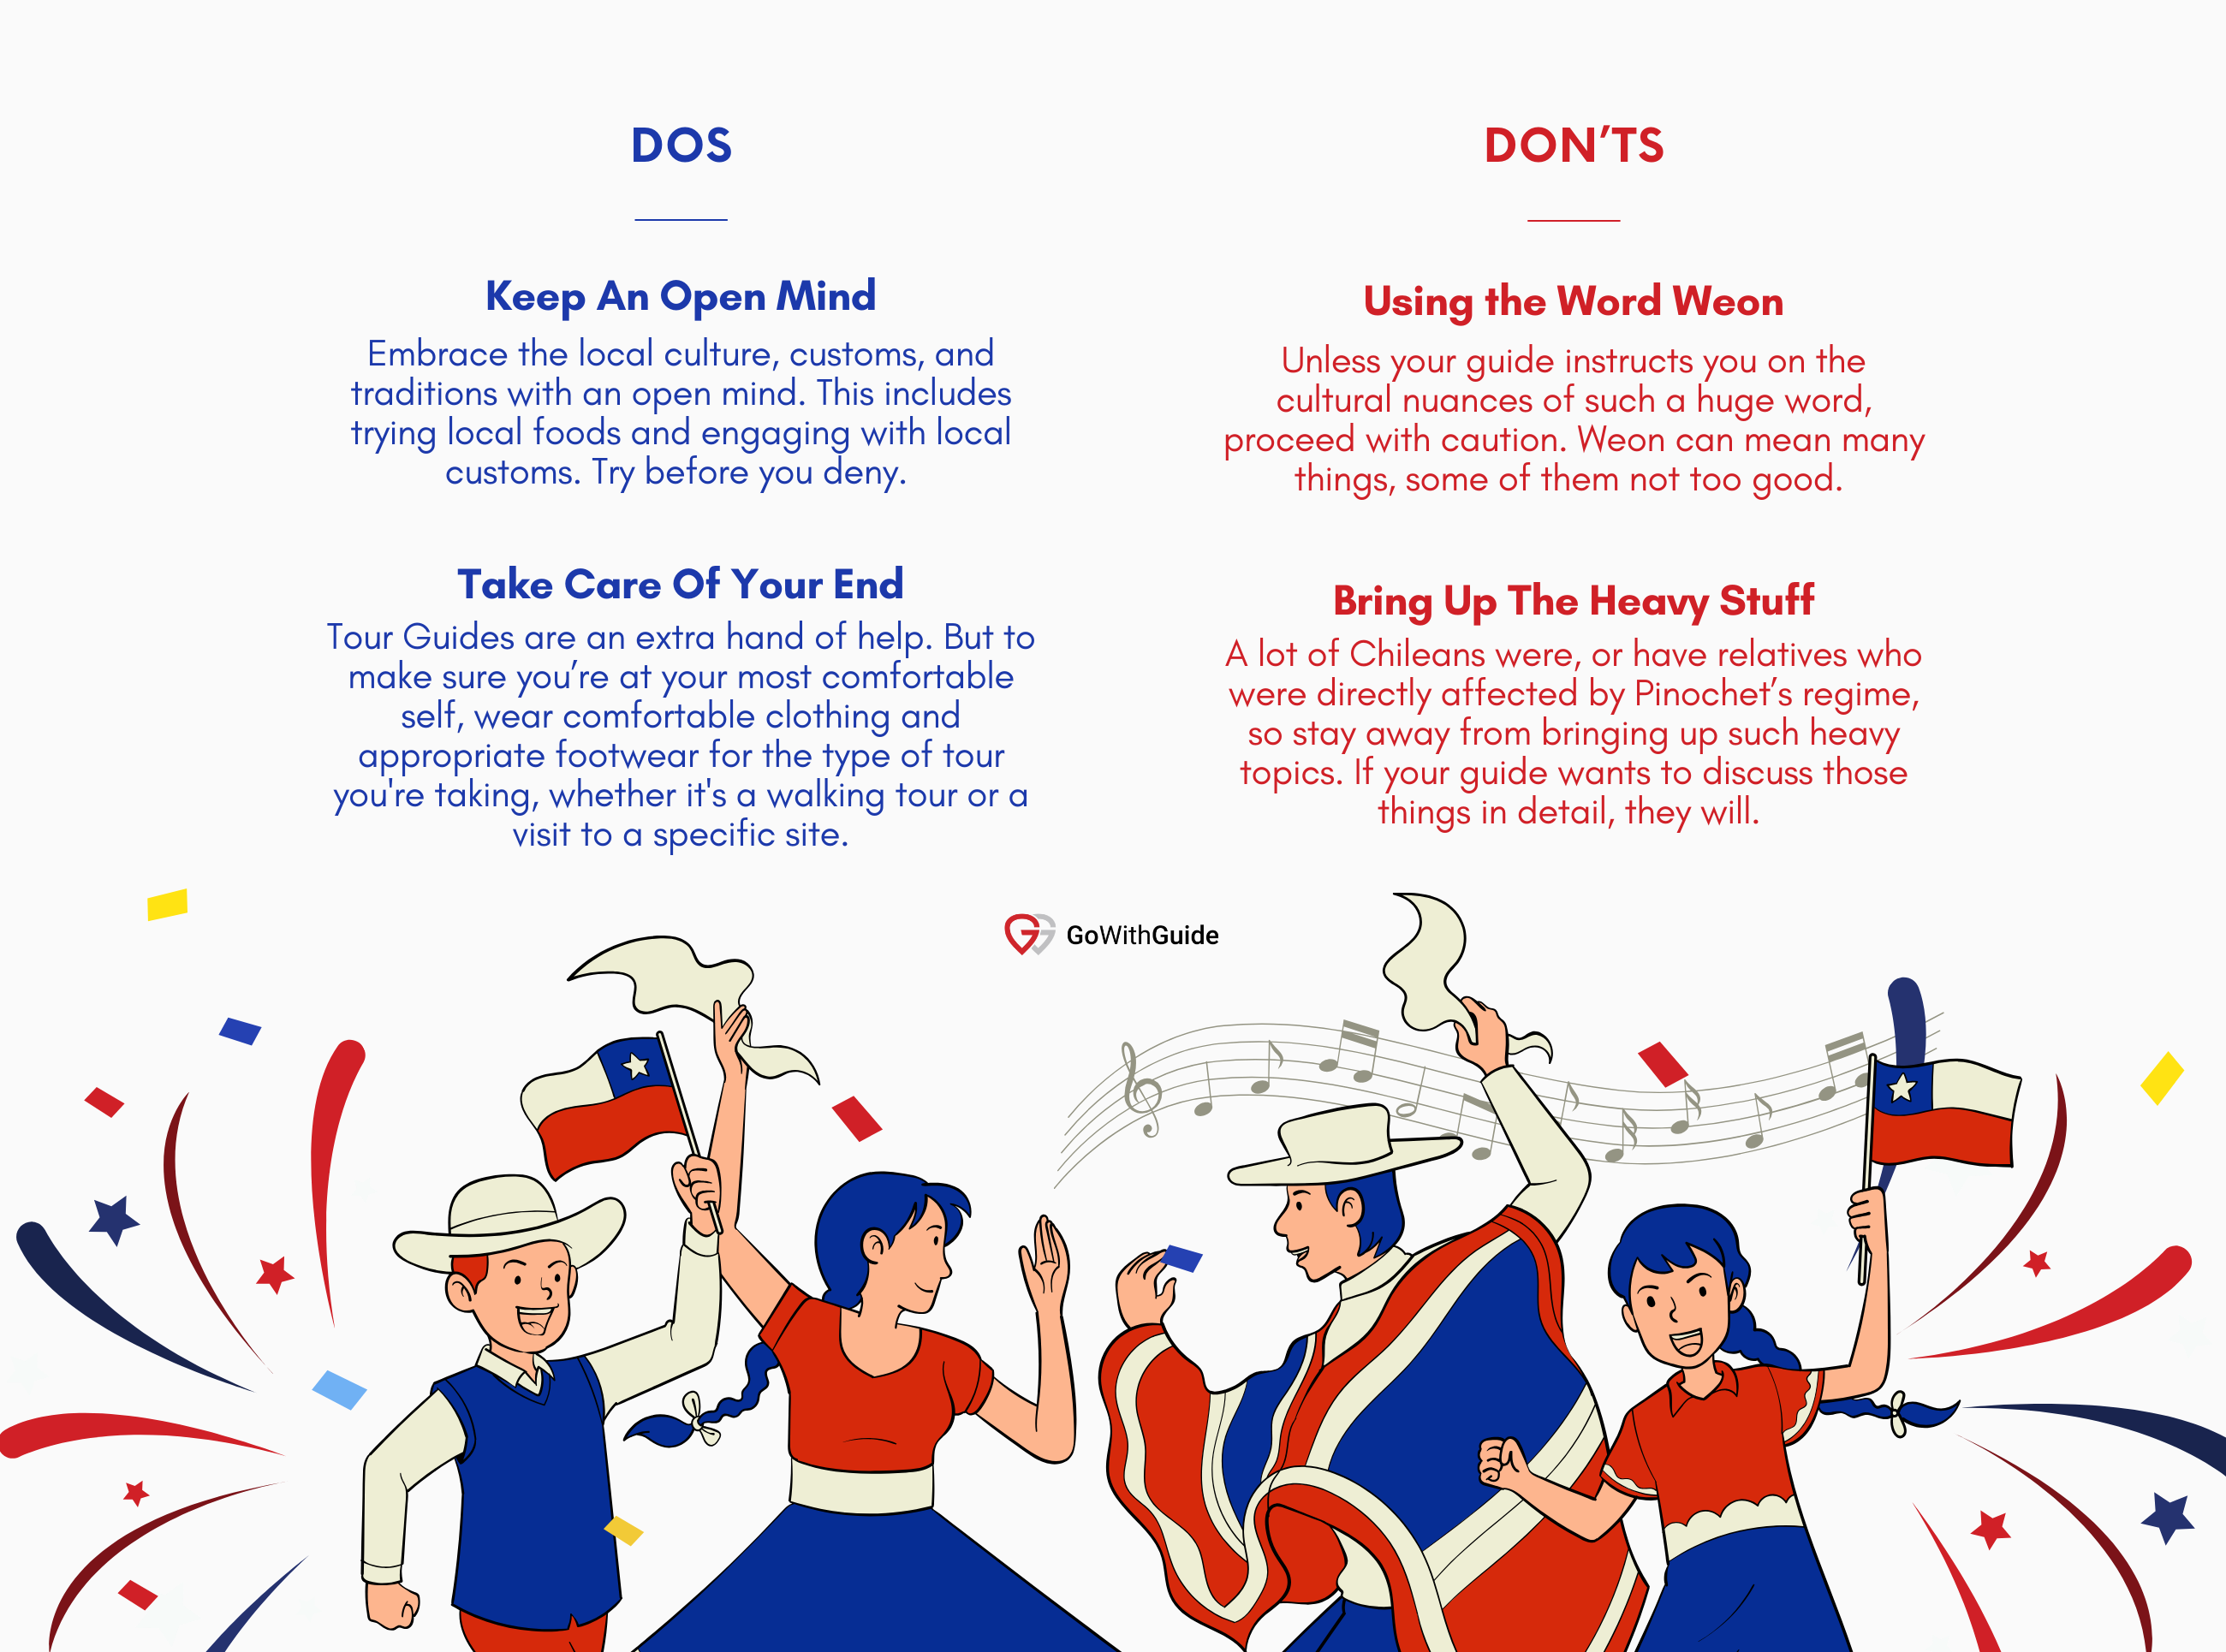 An infographic with two dos and two dont's for when you're on a guided tour in Santiago de Chile part 1